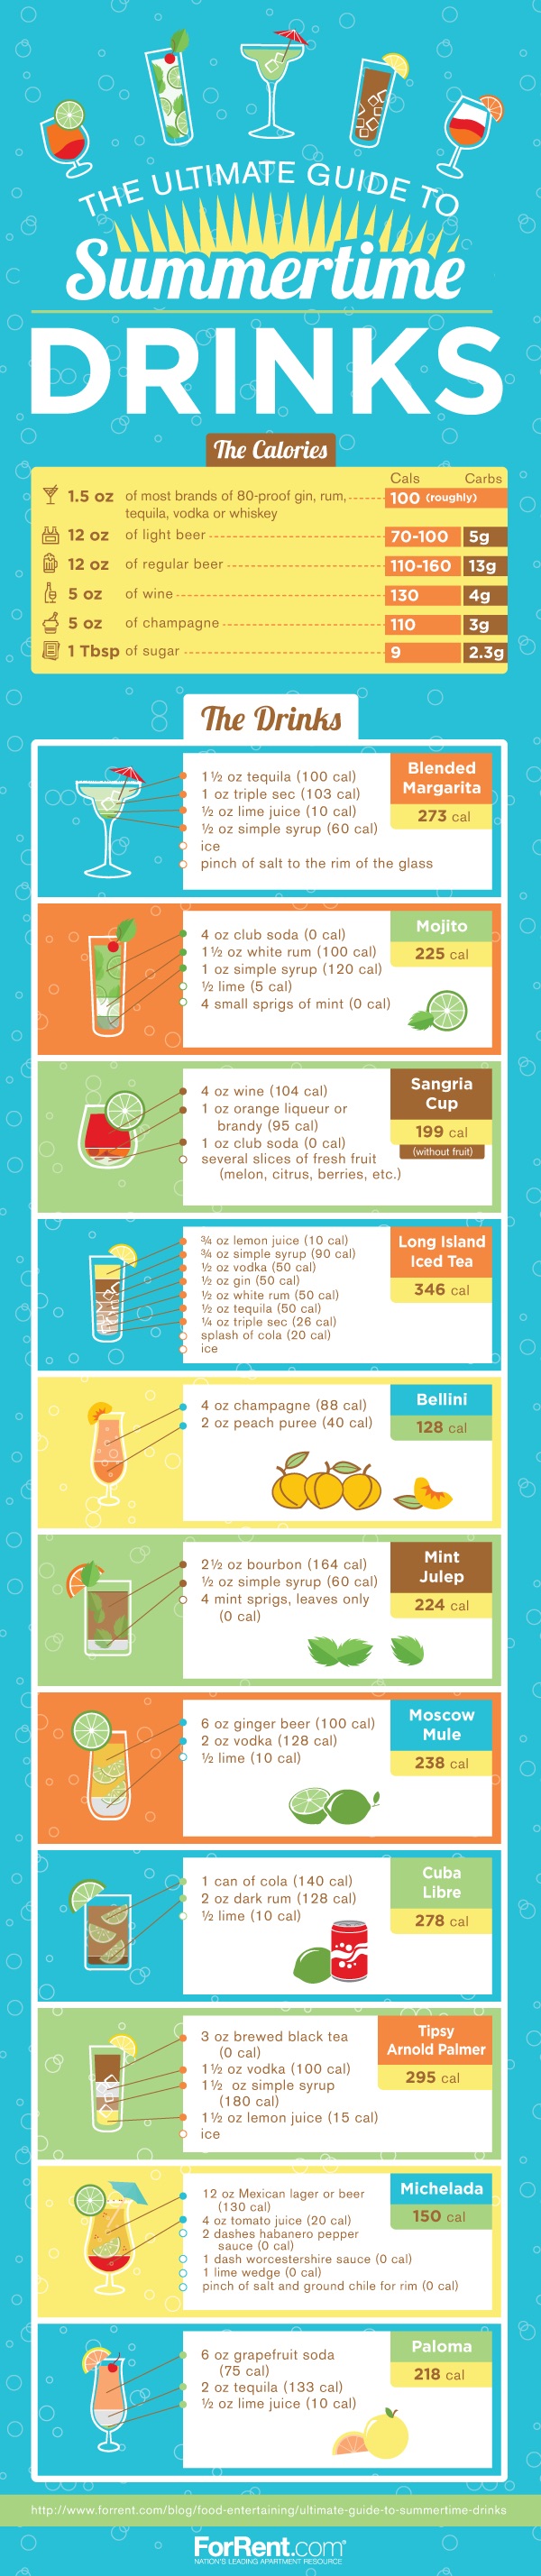 Ultimate-Guide-to-Summertime-Drinks-main